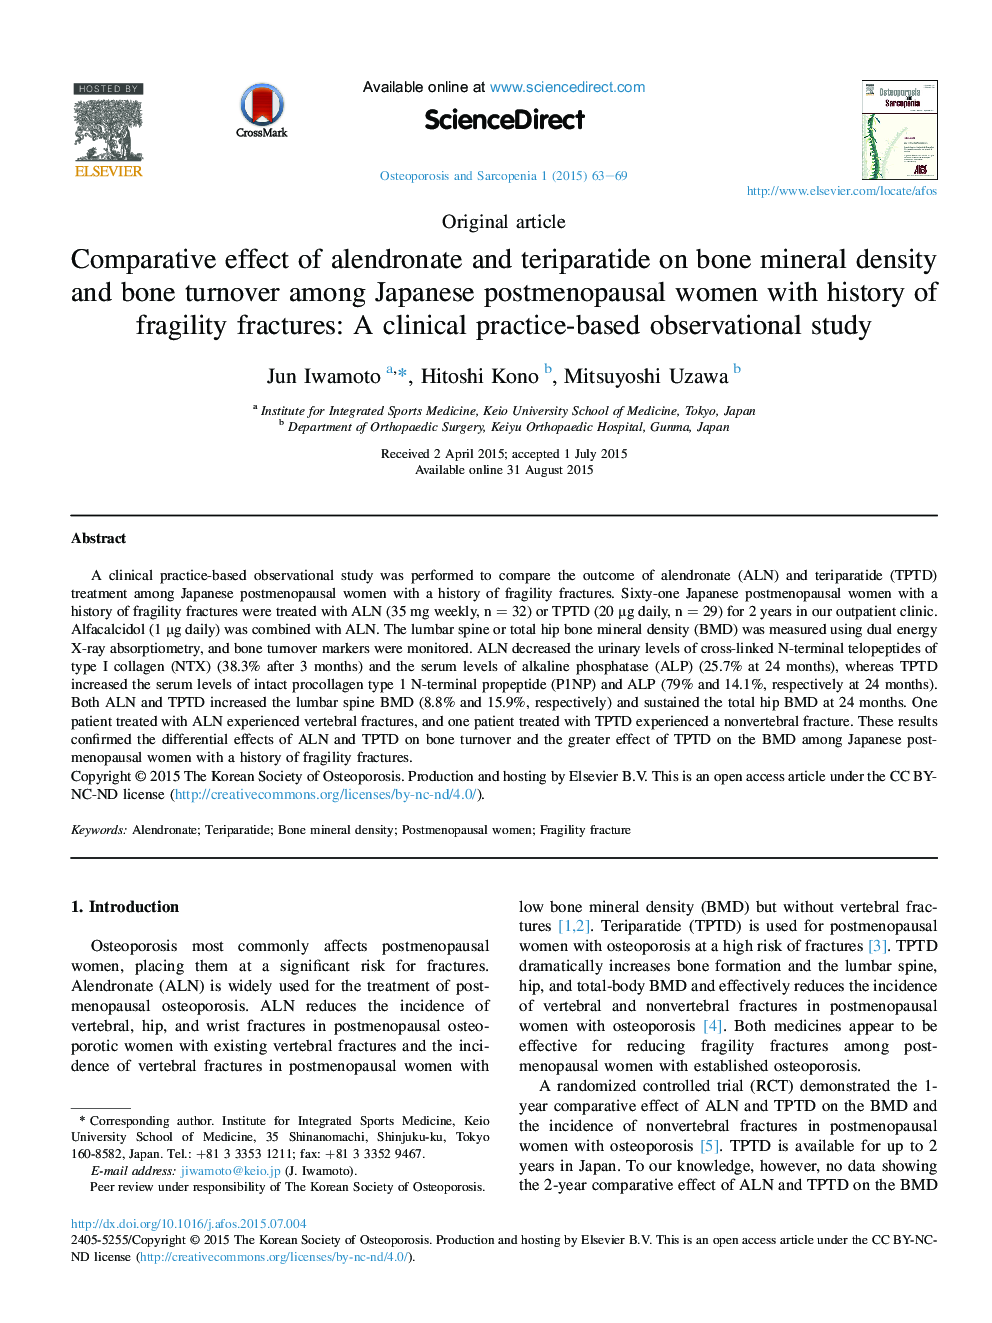 Comparative effect of alendronate and teriparatide on bone mineral density and bone turnover among Japanese postmenopausal women with history of fragility fractures: A clinical practice-based observational study 